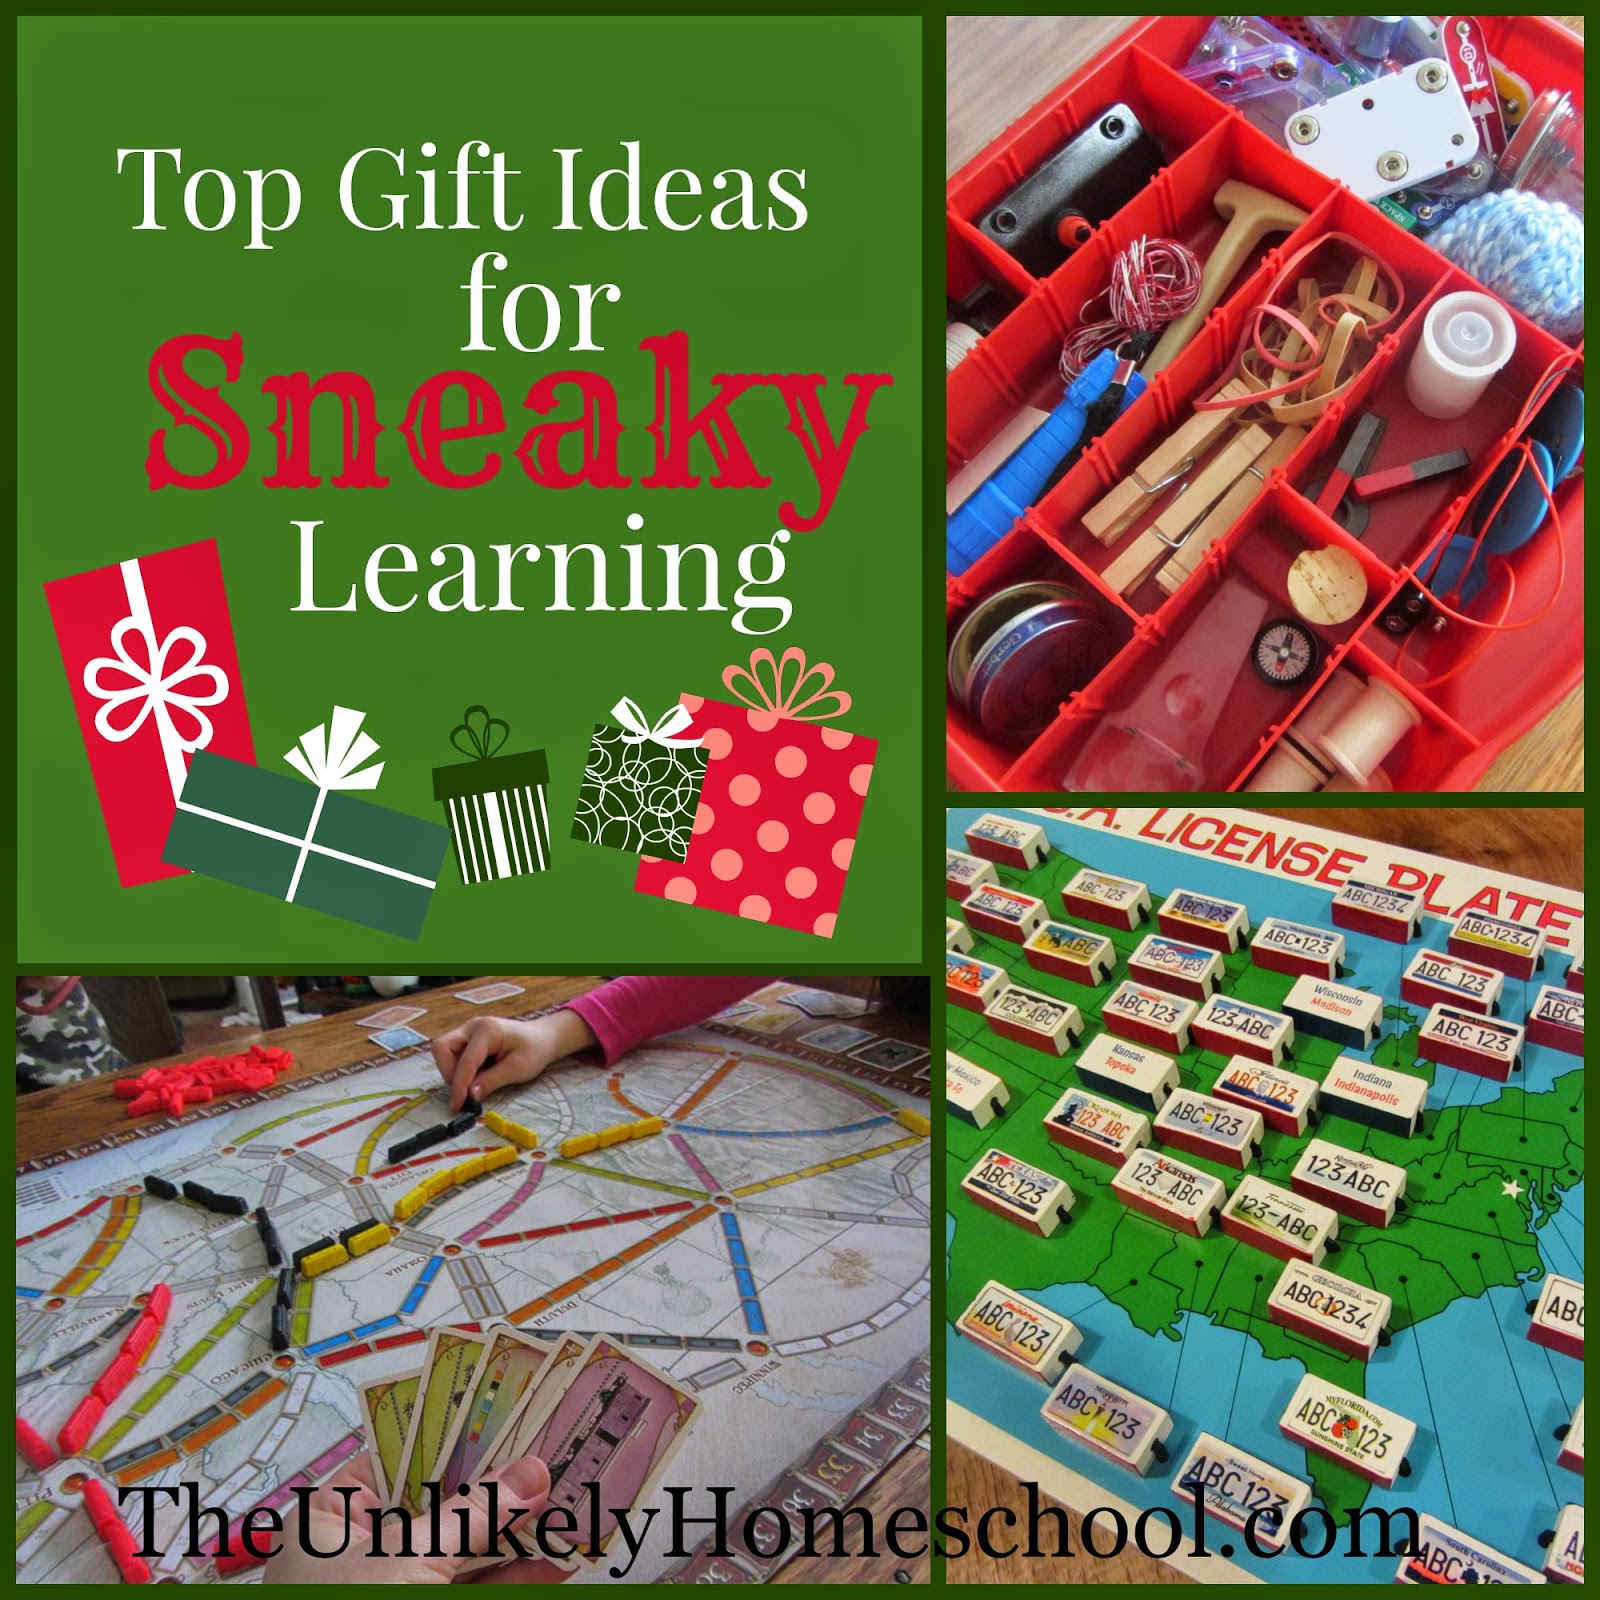 Top Gift Ideas for Sneaky Learning {The Unlikely Homeschool}